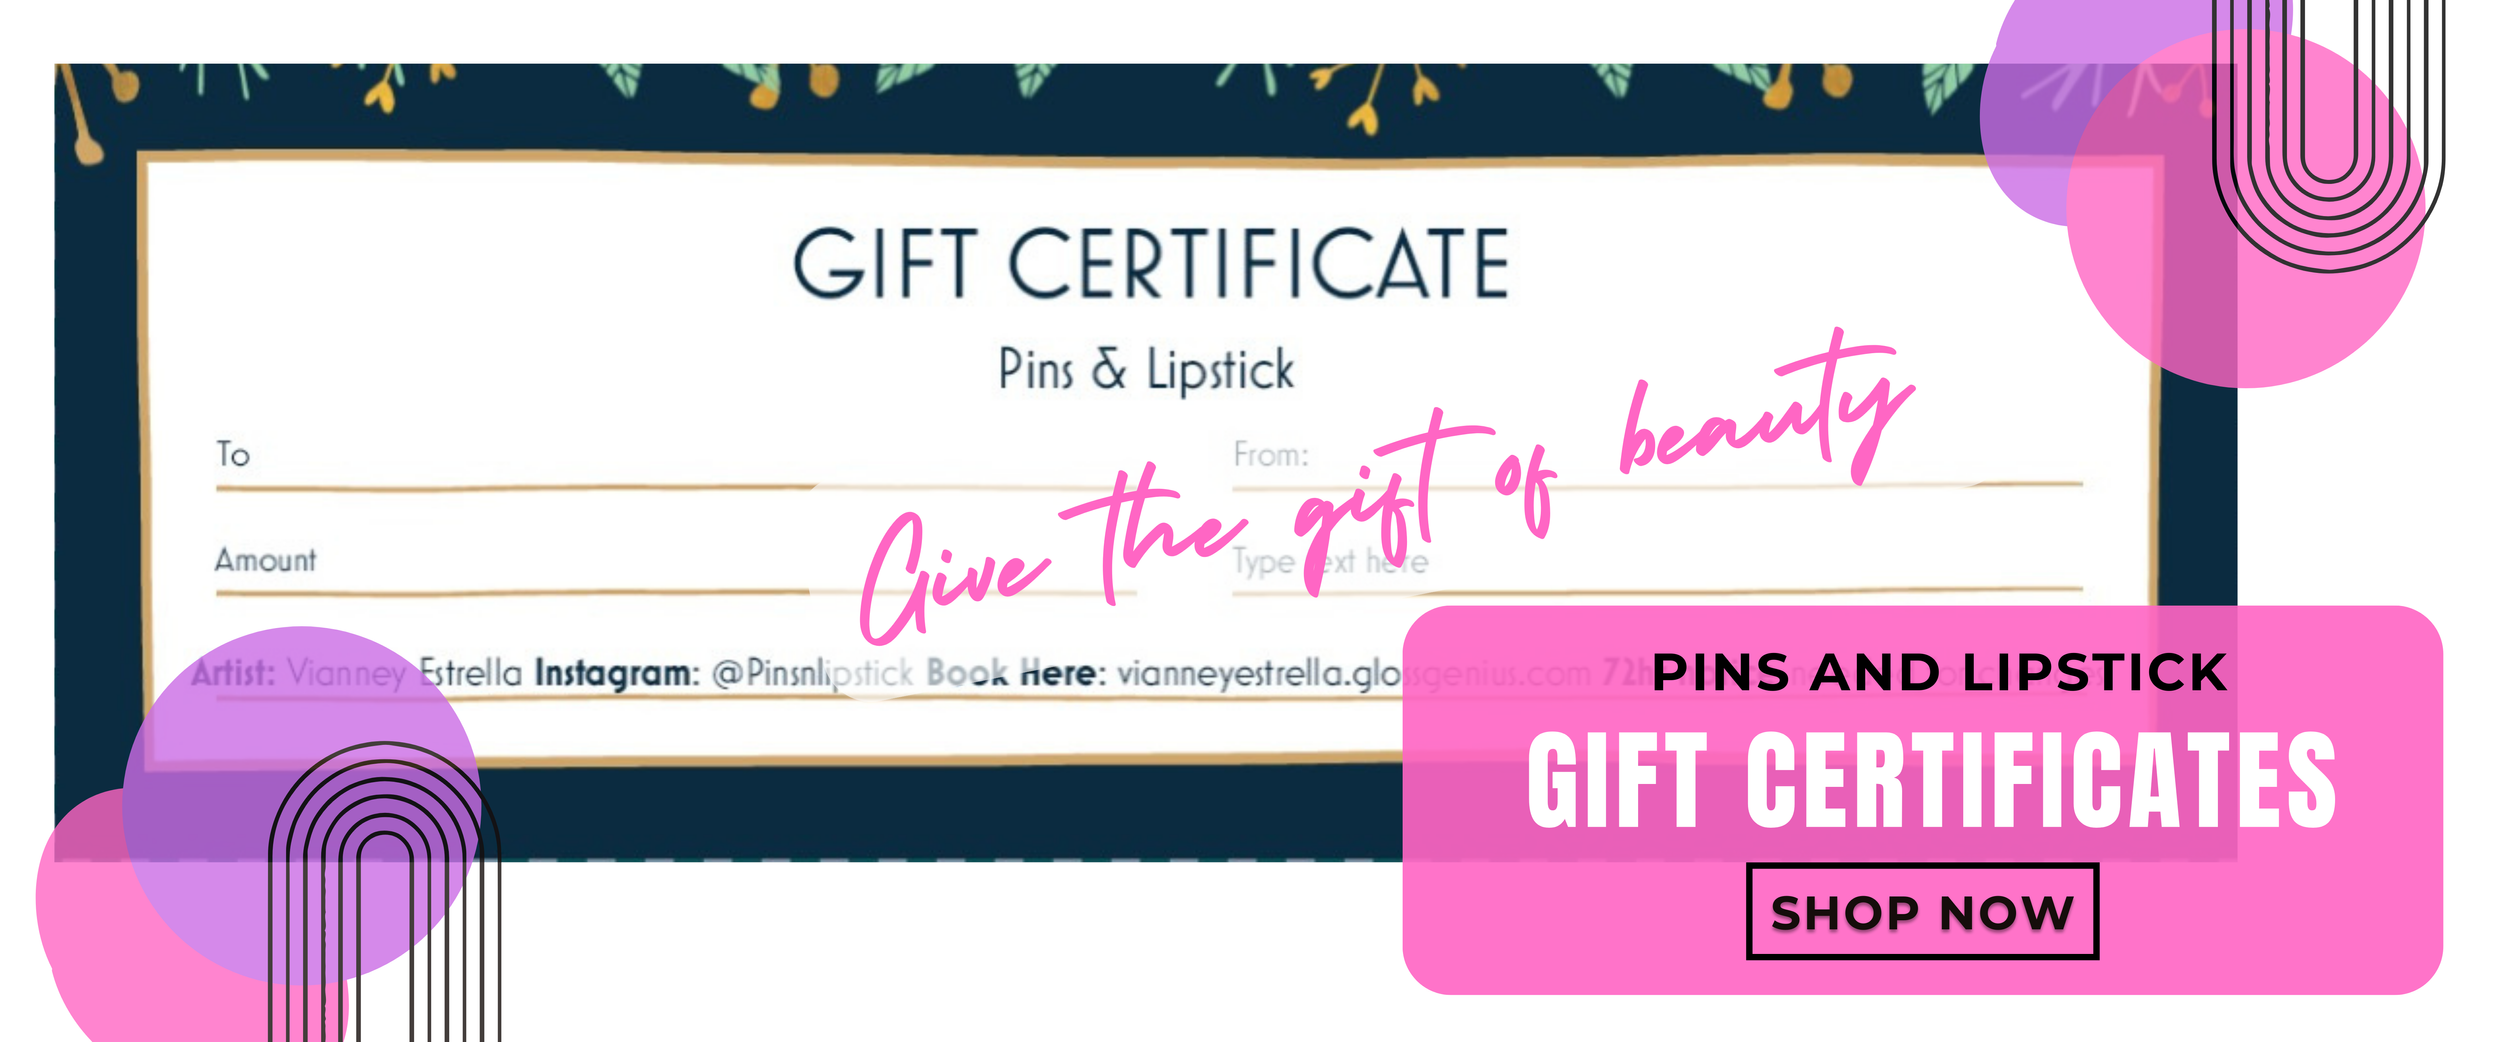 pins and lipstick gift certificate